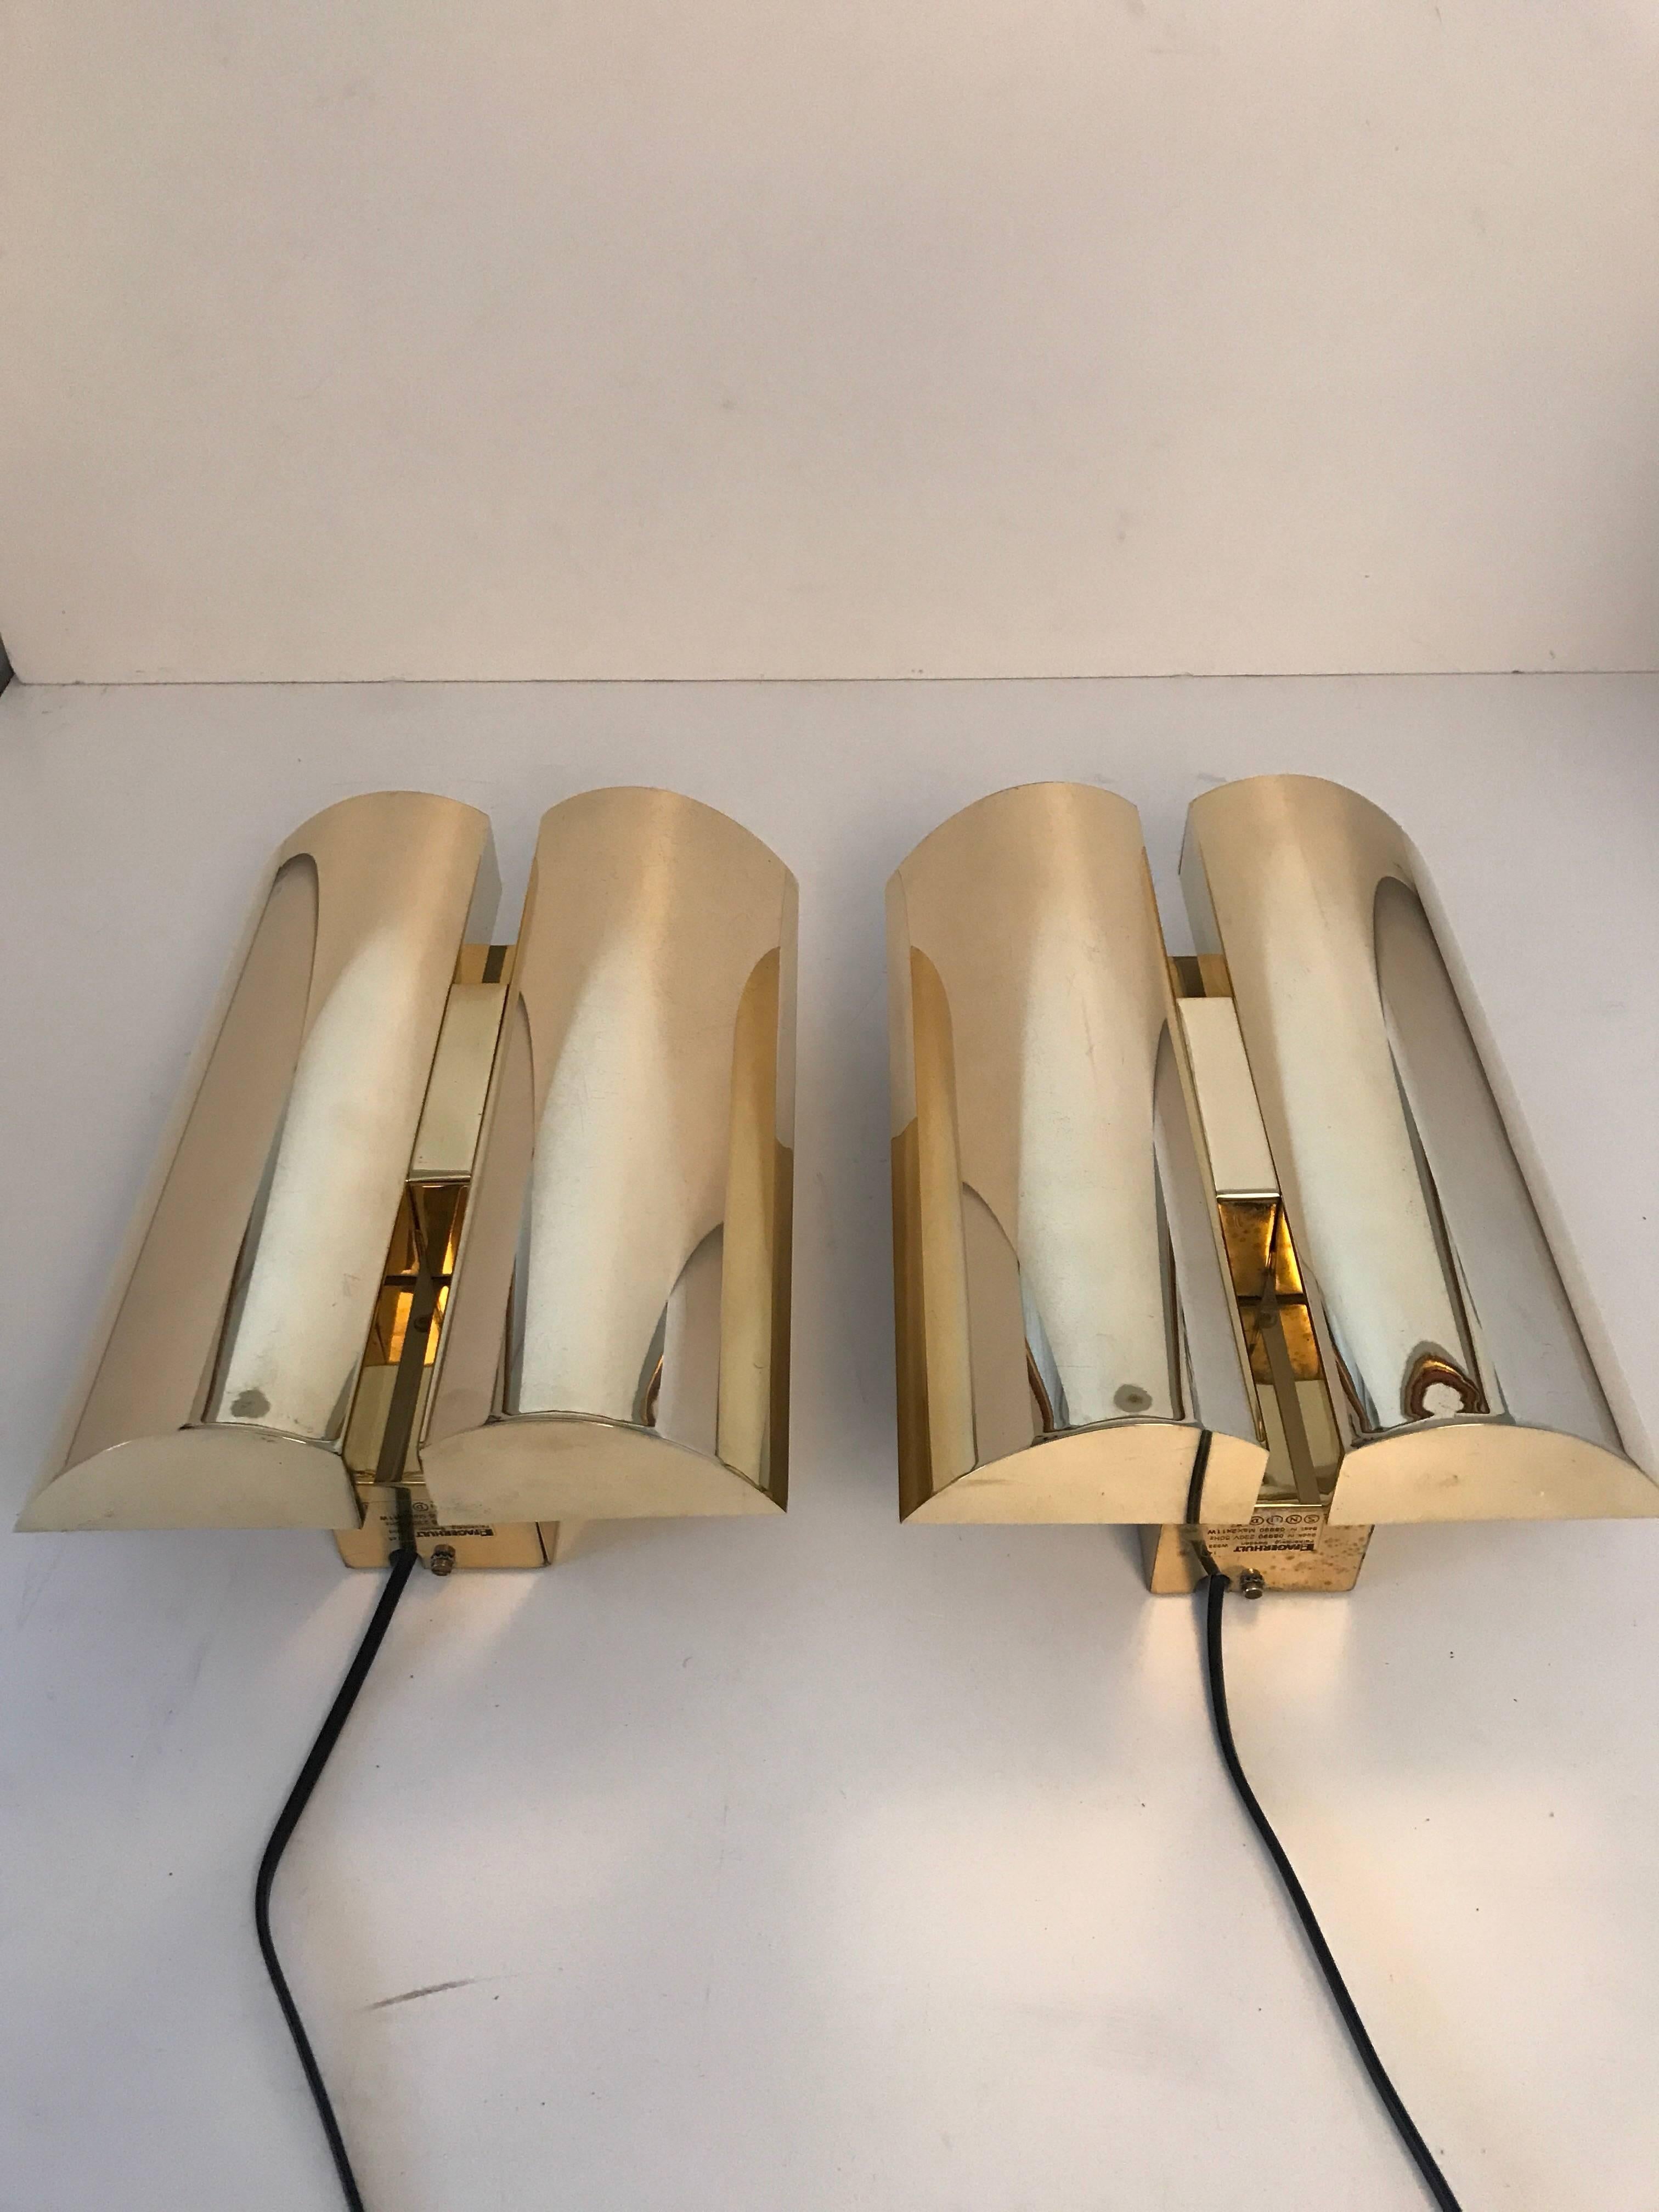 Polished Rare Pair Swedish Fagerhult Brass Wall Sconces Late 20th Century For Sale